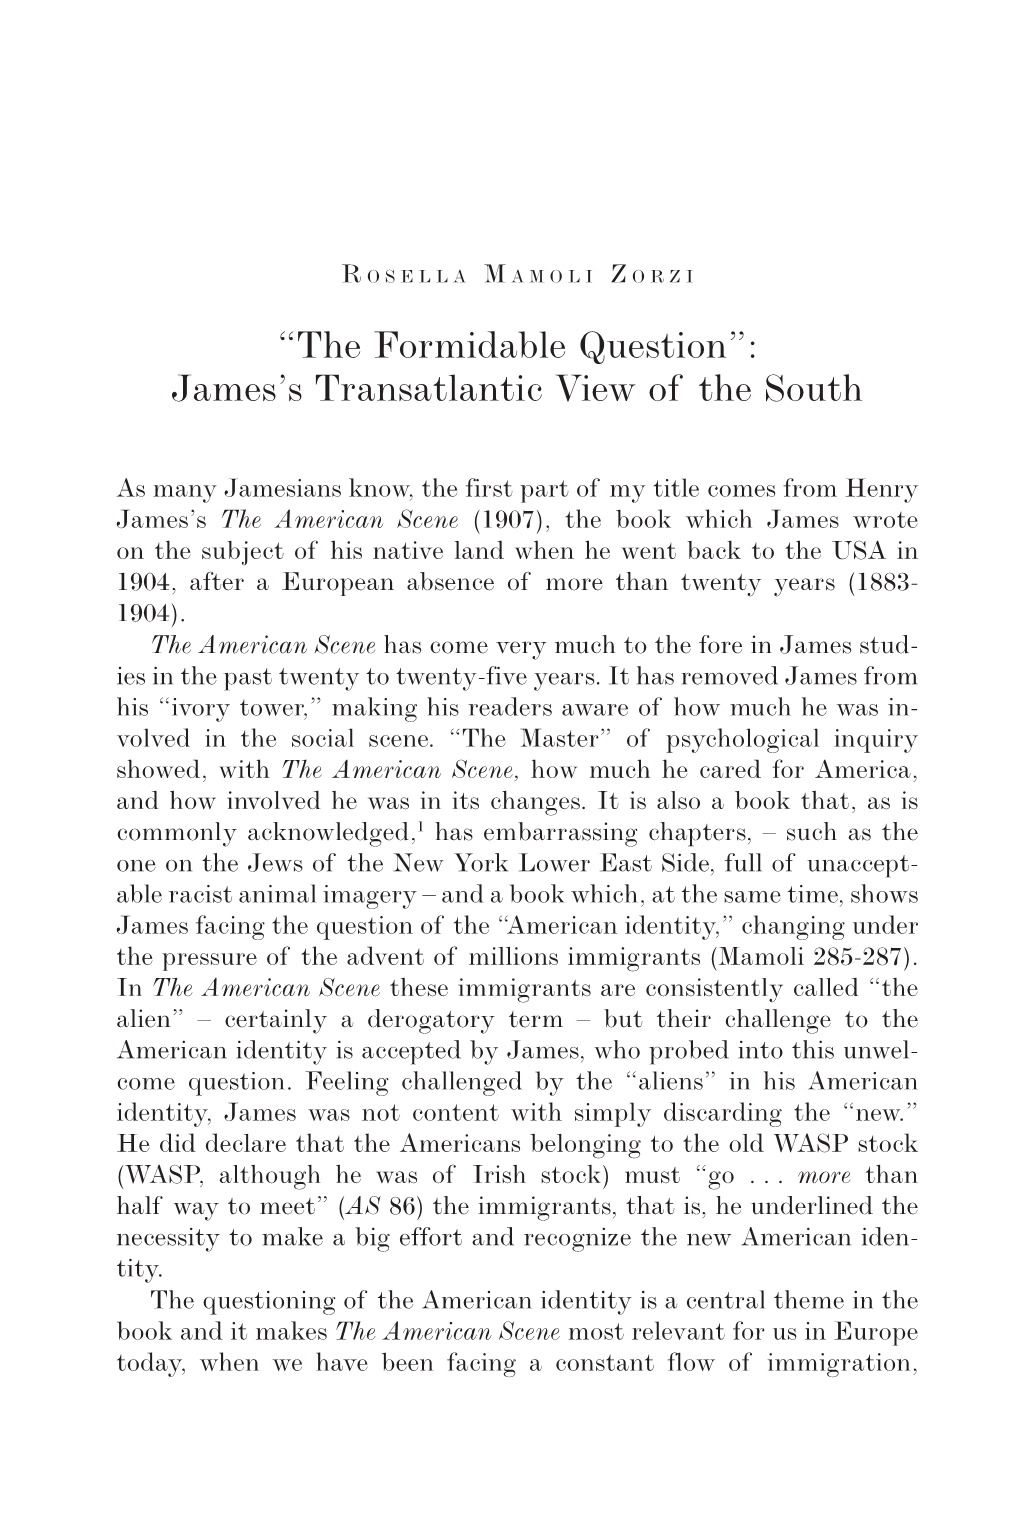 “The Formidable Question”: James's Transatlantic View of the South